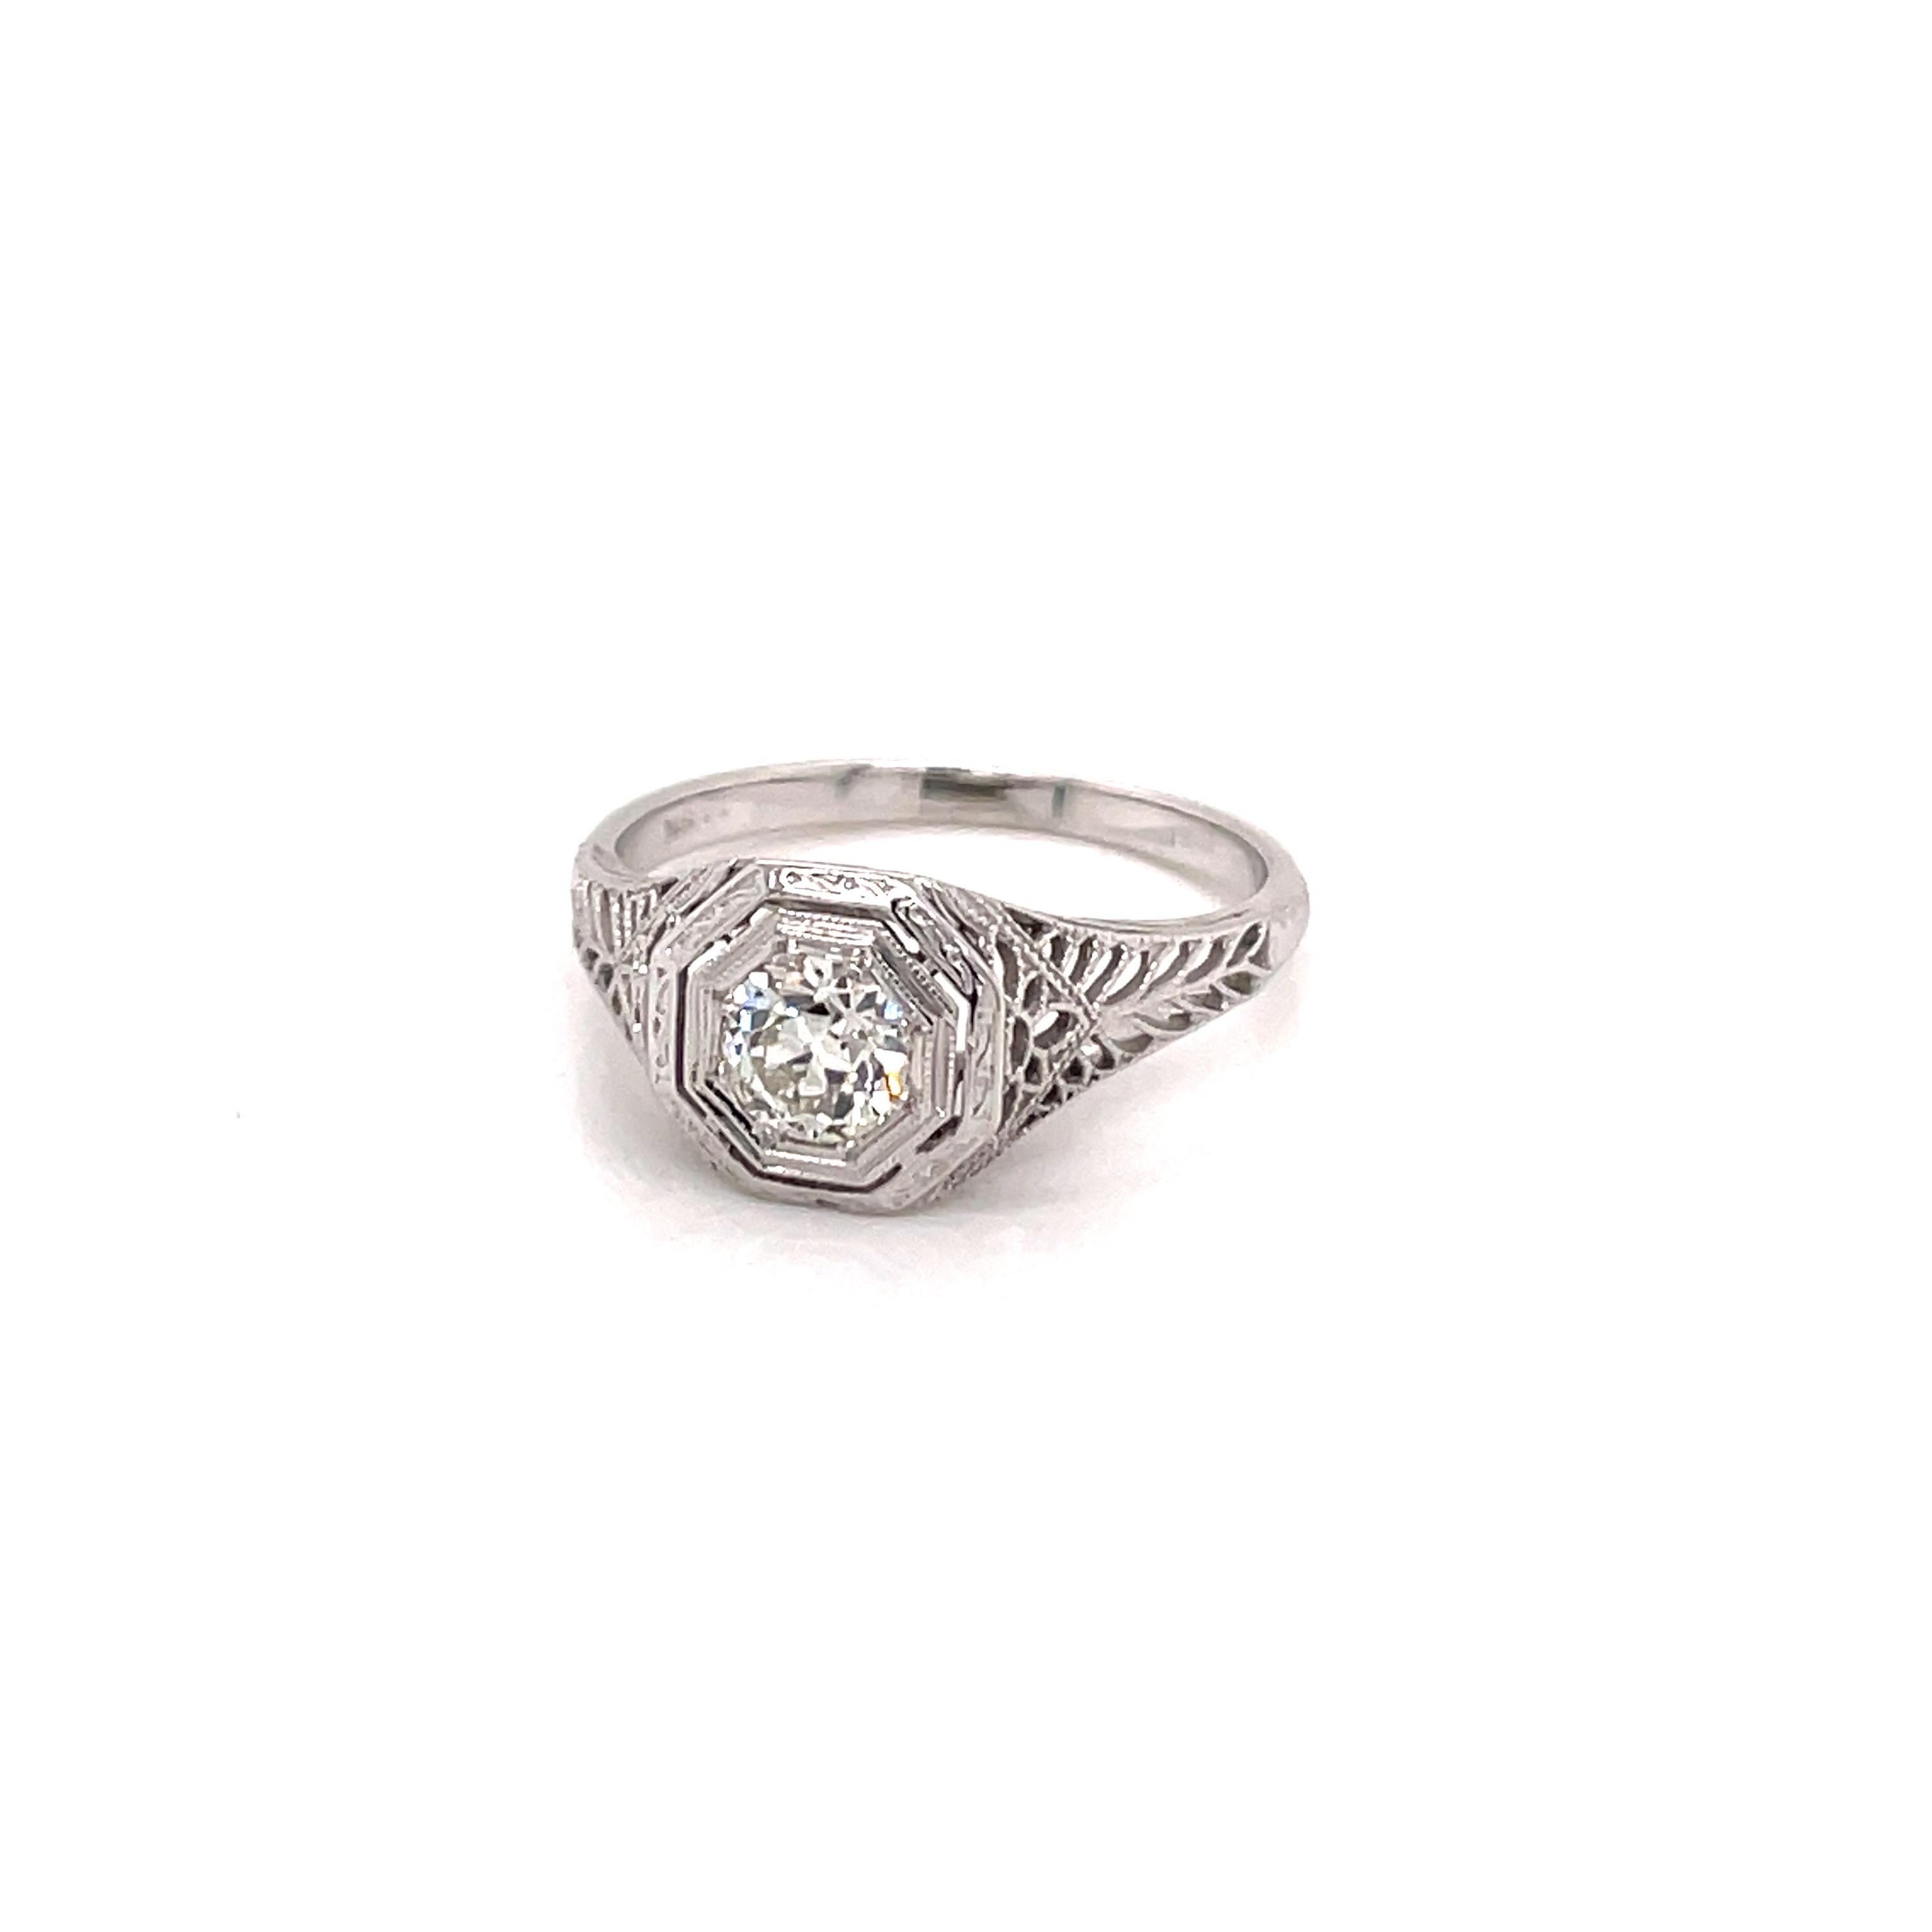 Vintage 1930s 18KW .50ct European Cut Diamond Filigree Art Deco Engagement Ring - The center diamond weighs approximately .50ct with K color and VS1 clarity. The diamond is set with 8 prongs in an 18K white gold Art Deco octagon setting. The setting